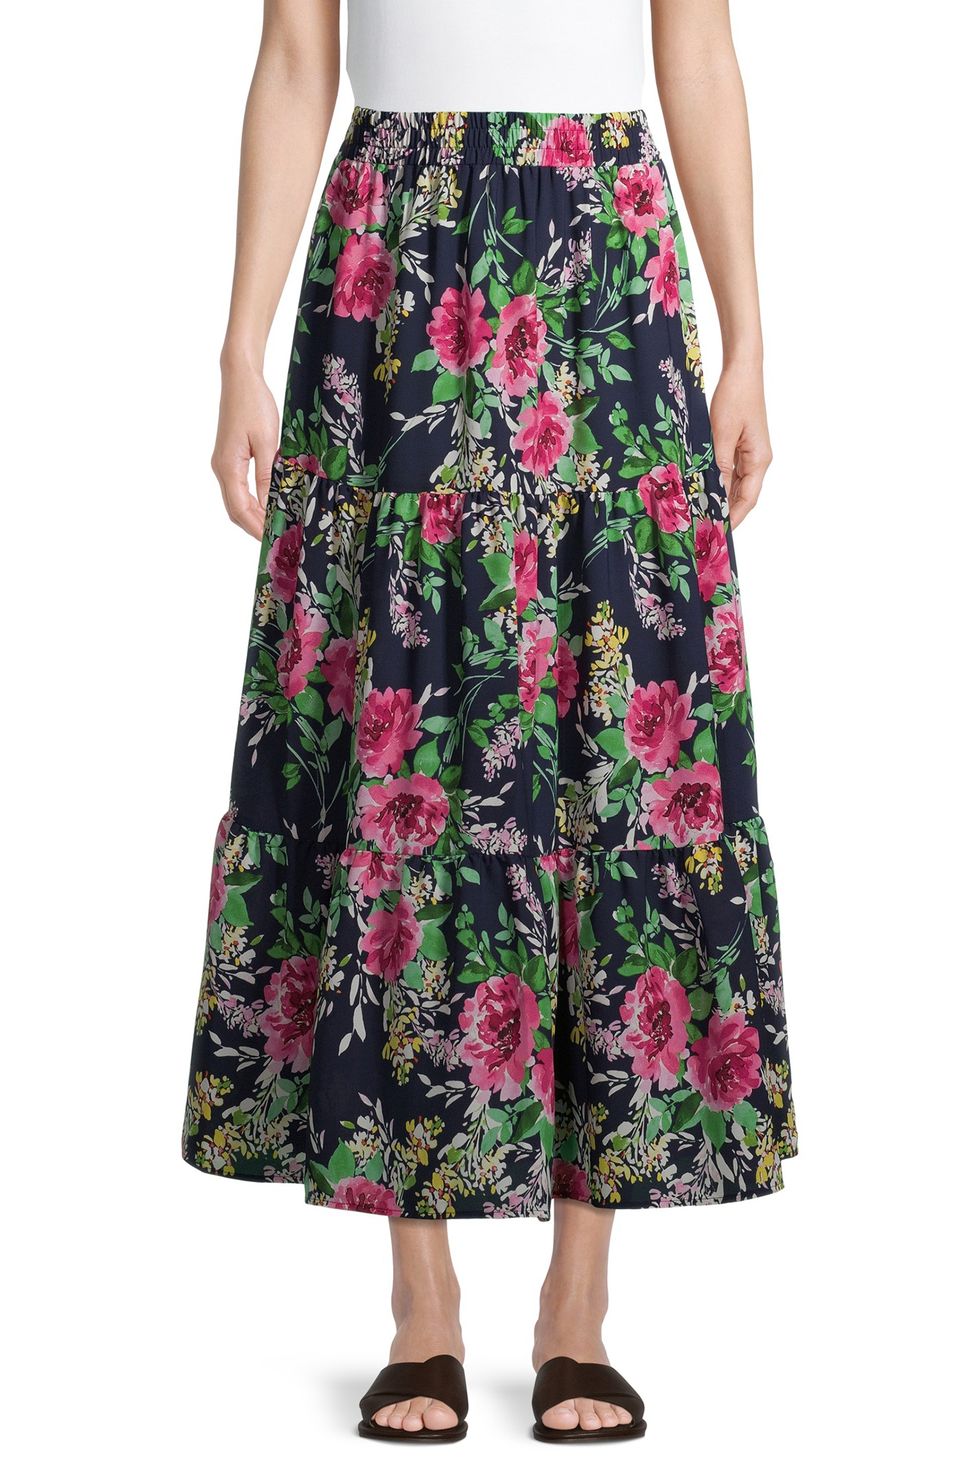 The Pioneer Woman Tiered Floral Skirt